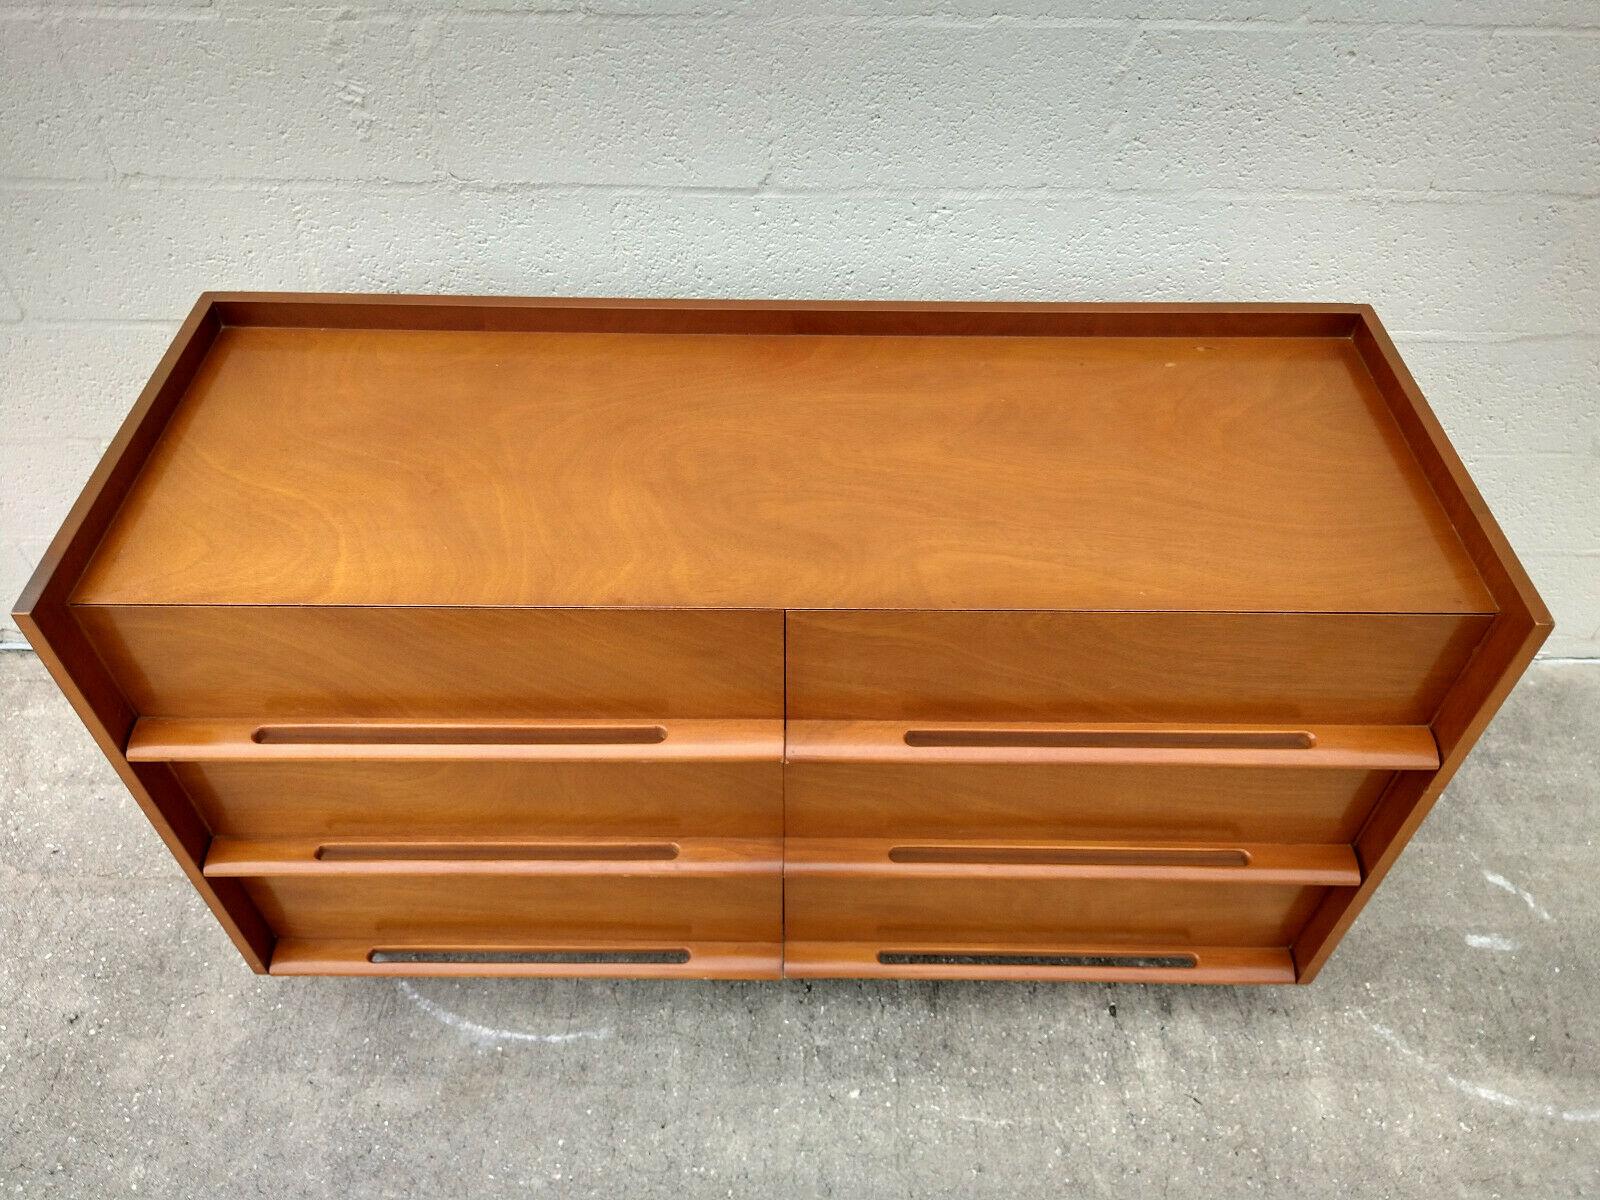 Edmond Spence dresser with six dovetailed drawers and sculpted pulls.

Mid-Century Modern masterpiece with a distinctive profile by American designer Edmond J. Spence. Spence's attention to detail shows in the set-back drawer faces, sculpted